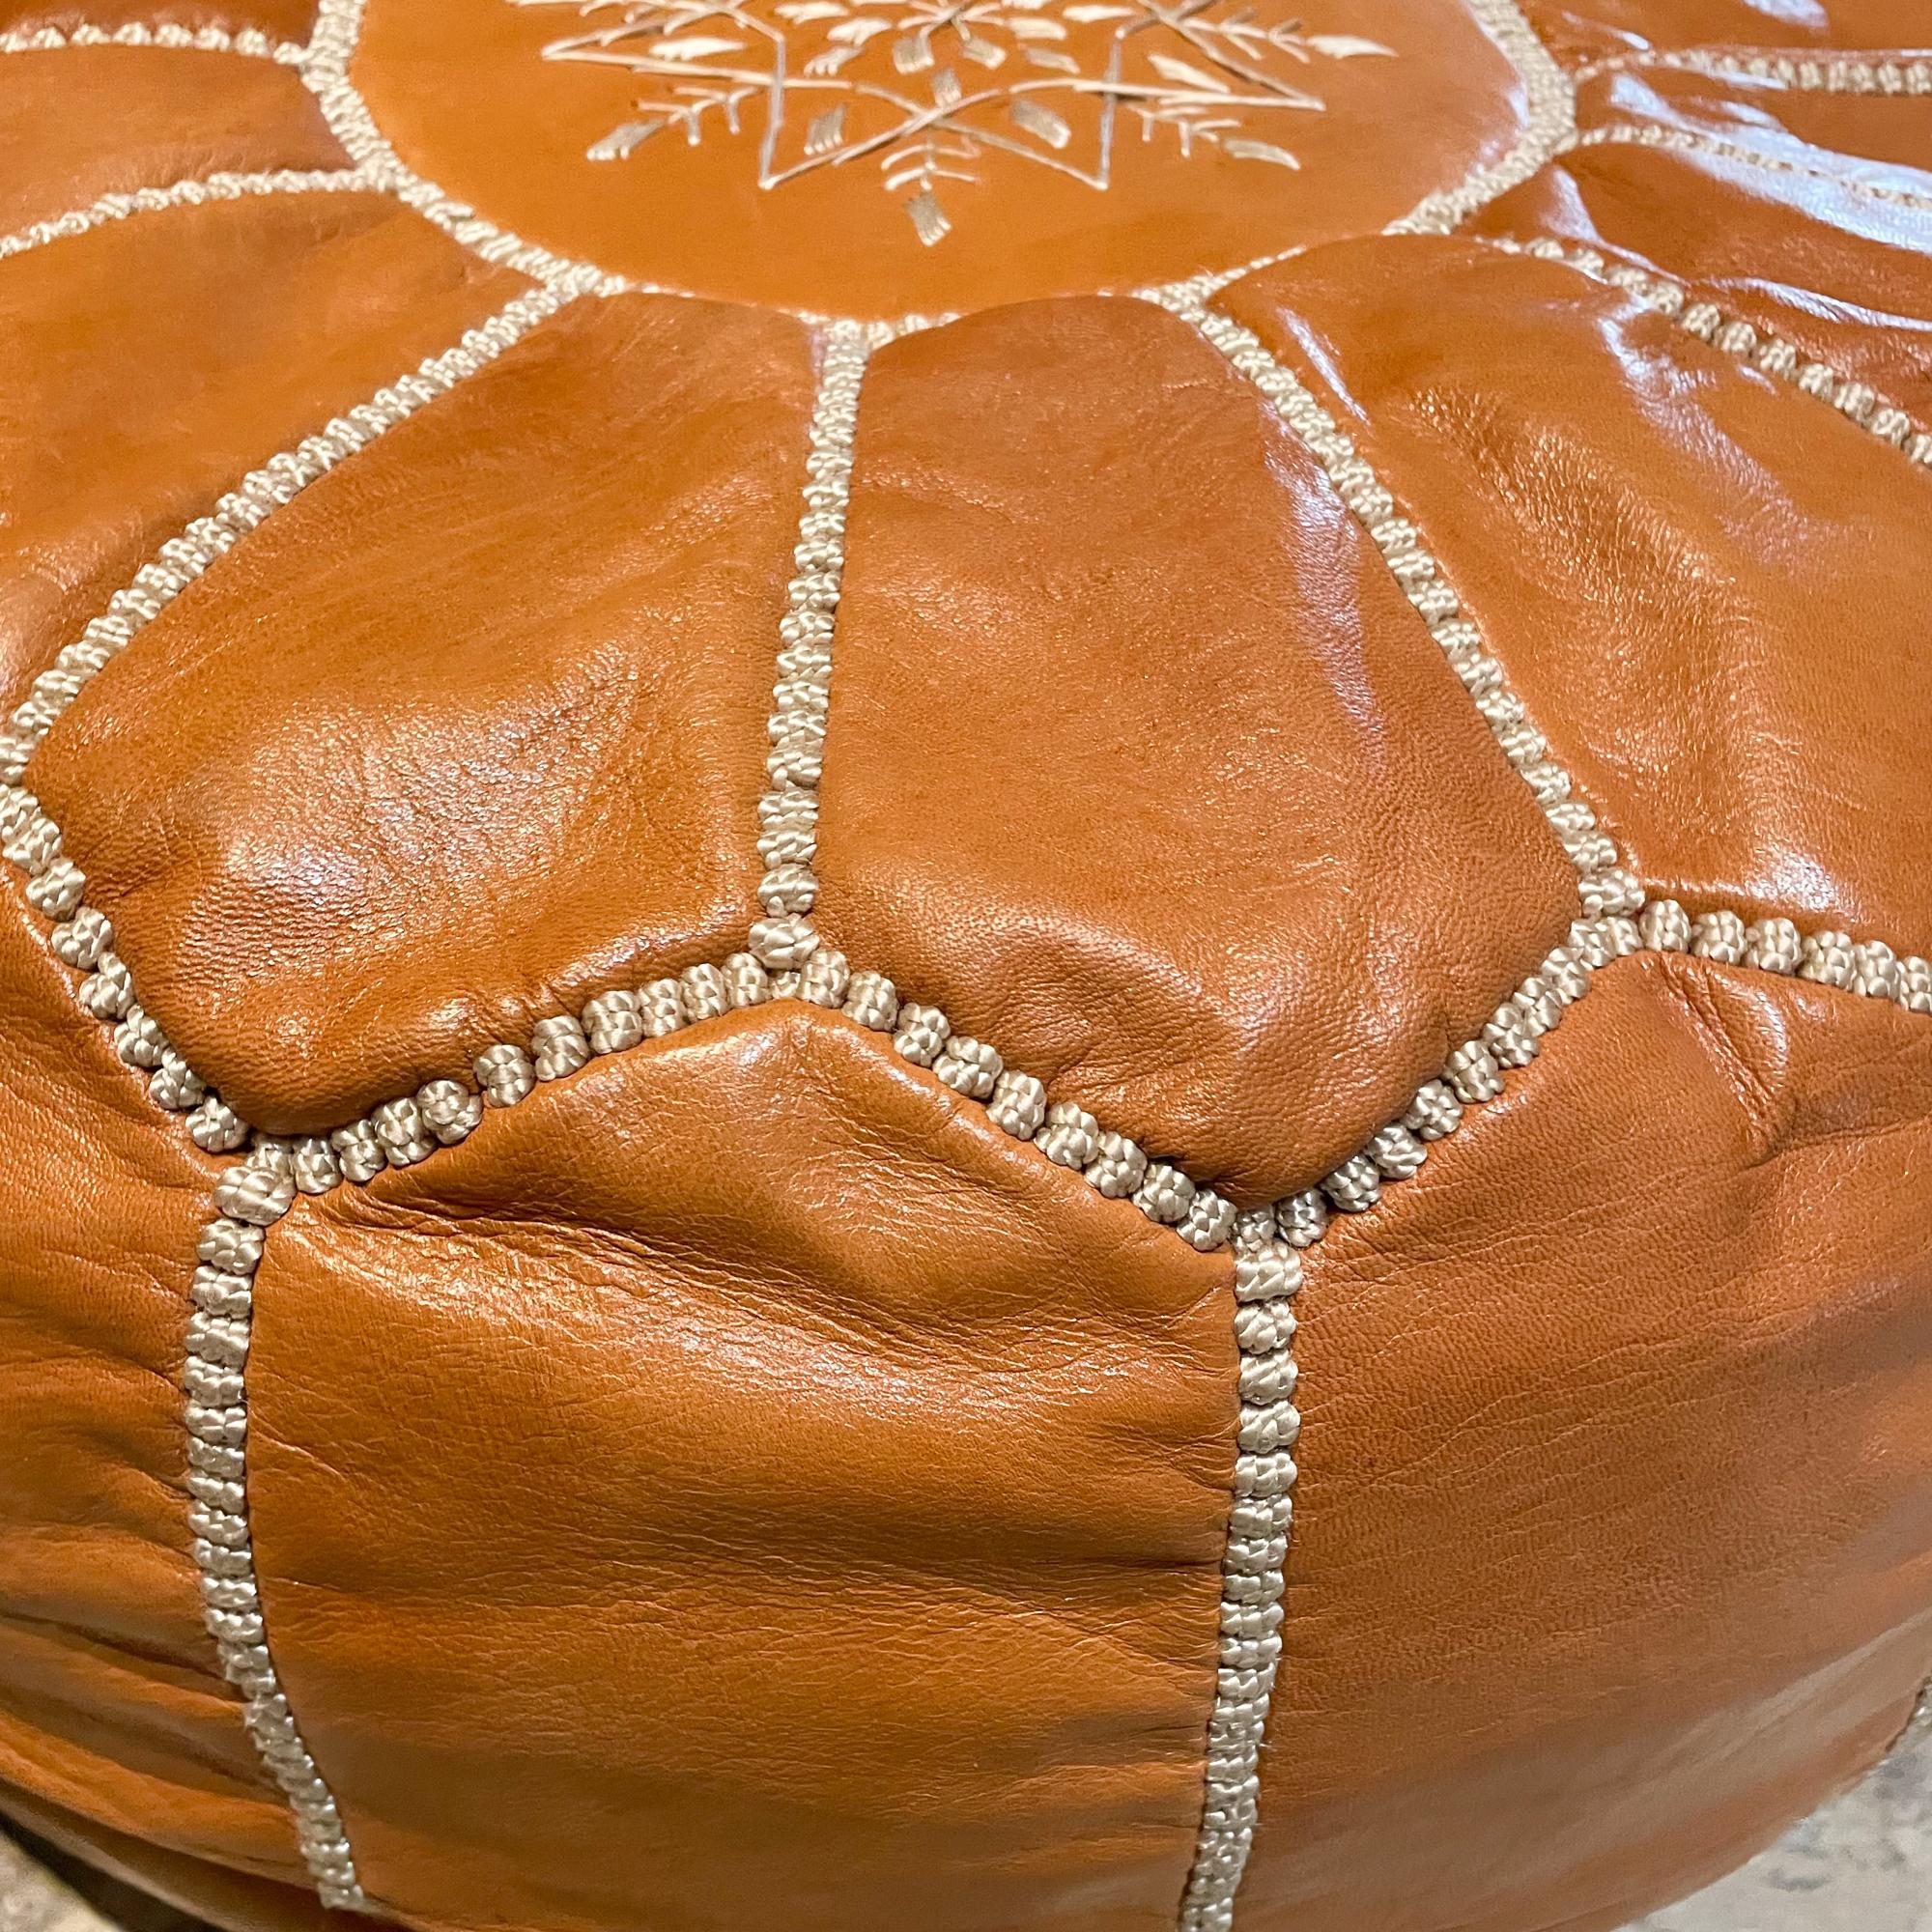 Late 20th Century Moroccan Round Pouf Ottoman in Rich Saddle Leather with Radiant Embroidery 1970s